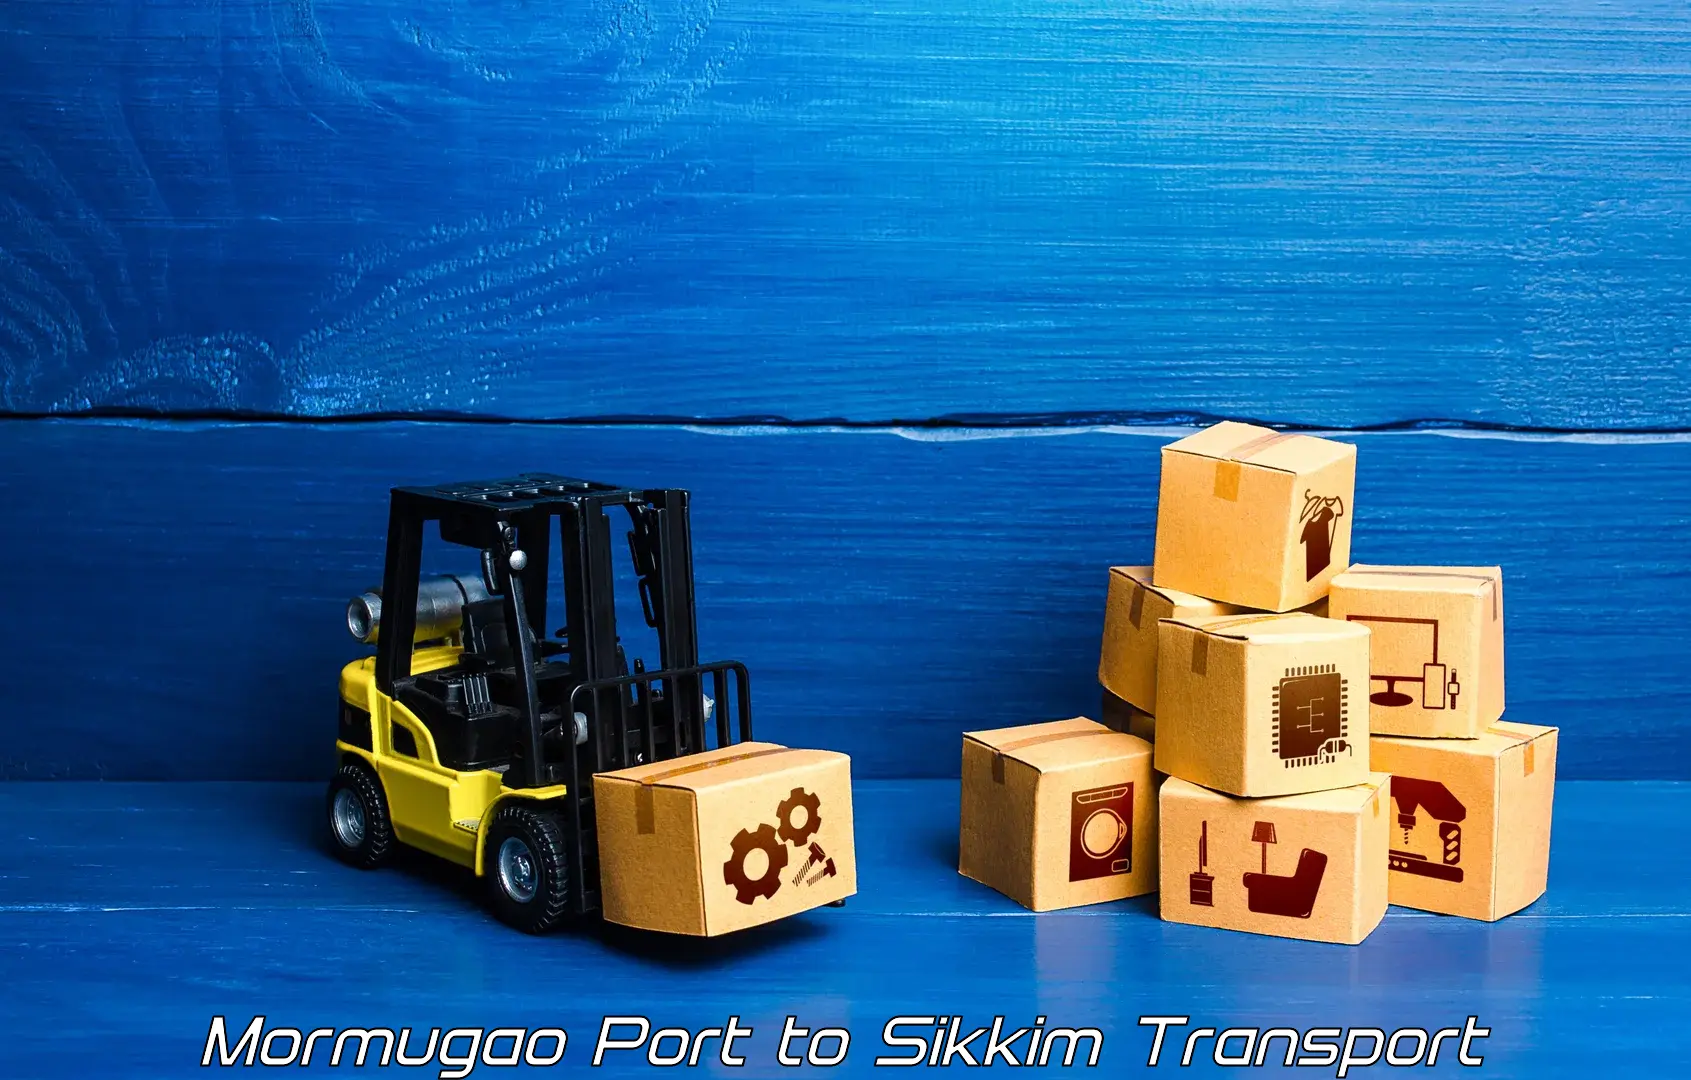 Delivery service Mormugao Port to Pelling